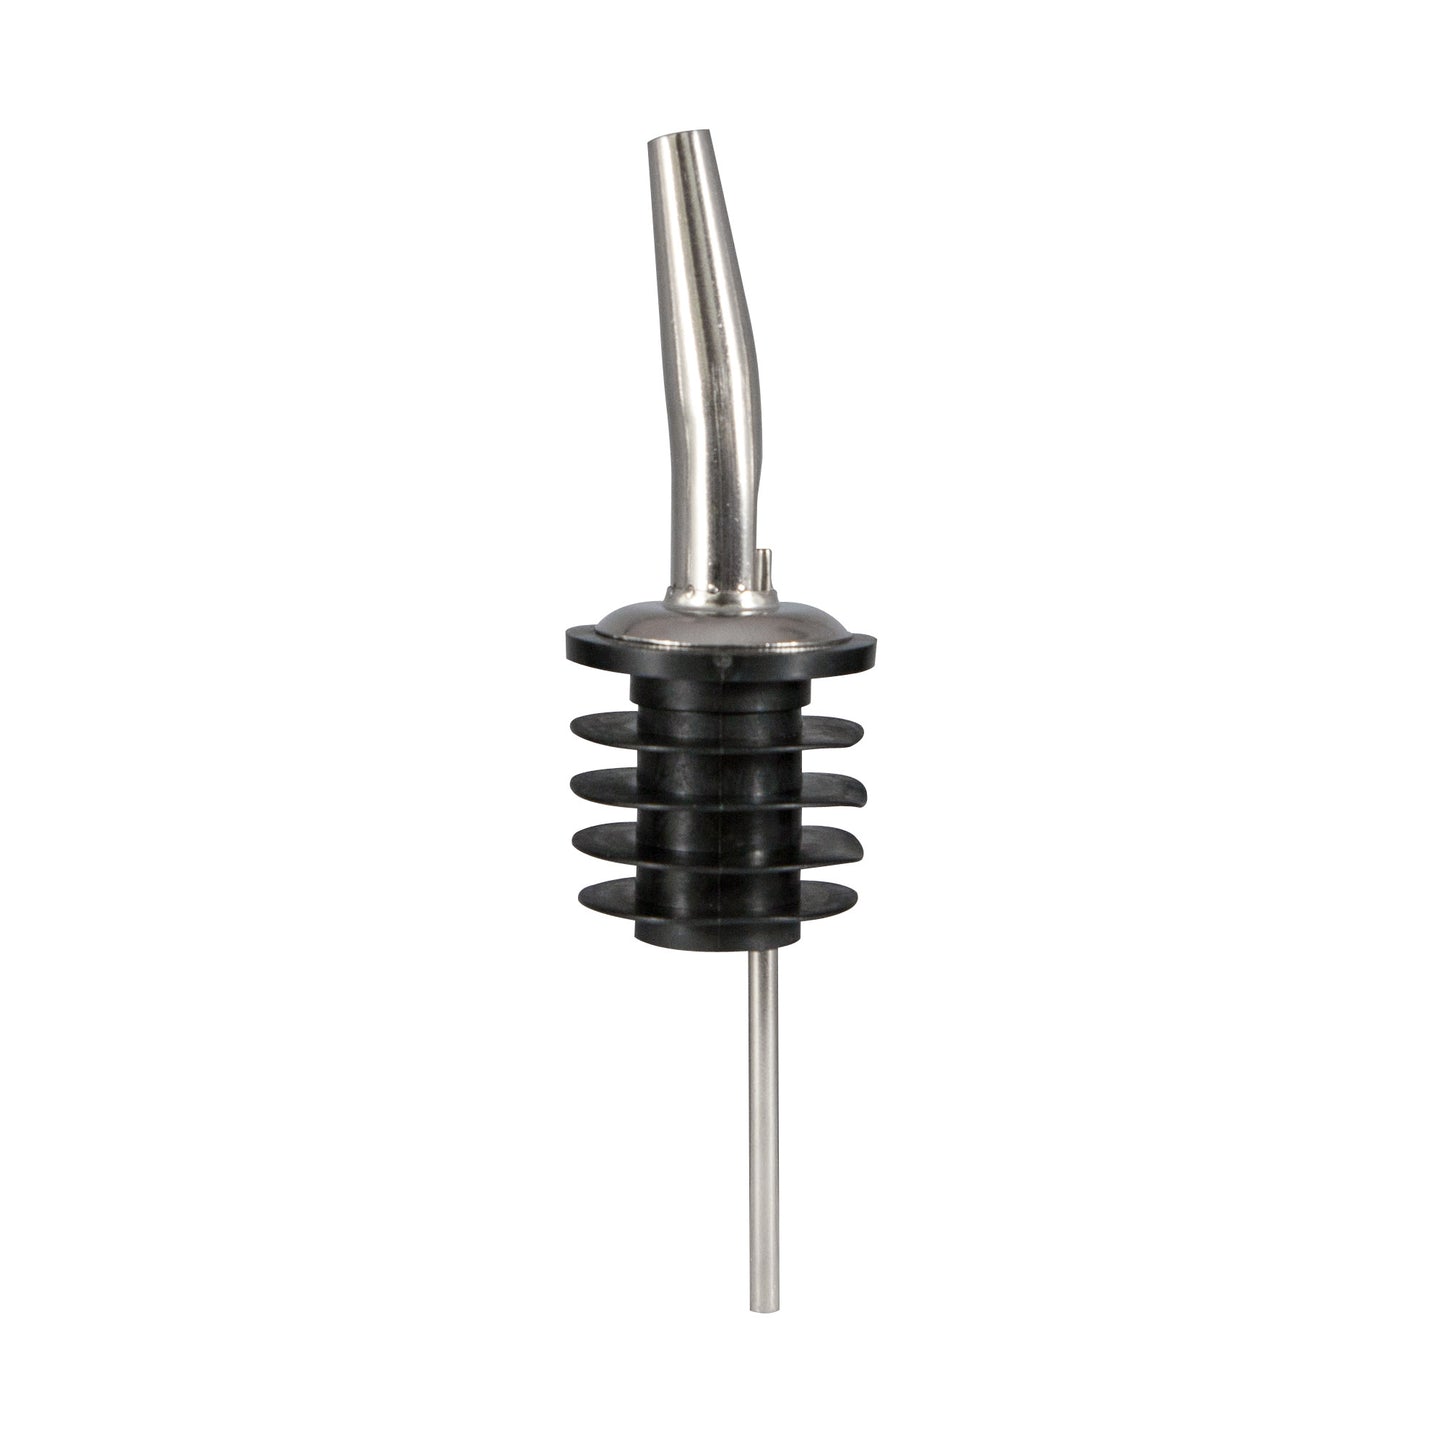 CR-285PW - Bar Maid "Betterway" Stainless Steel Medium Speed Pourers, Tapered With Poly Wide Cork, No Screen - 12 Pieces/Pack